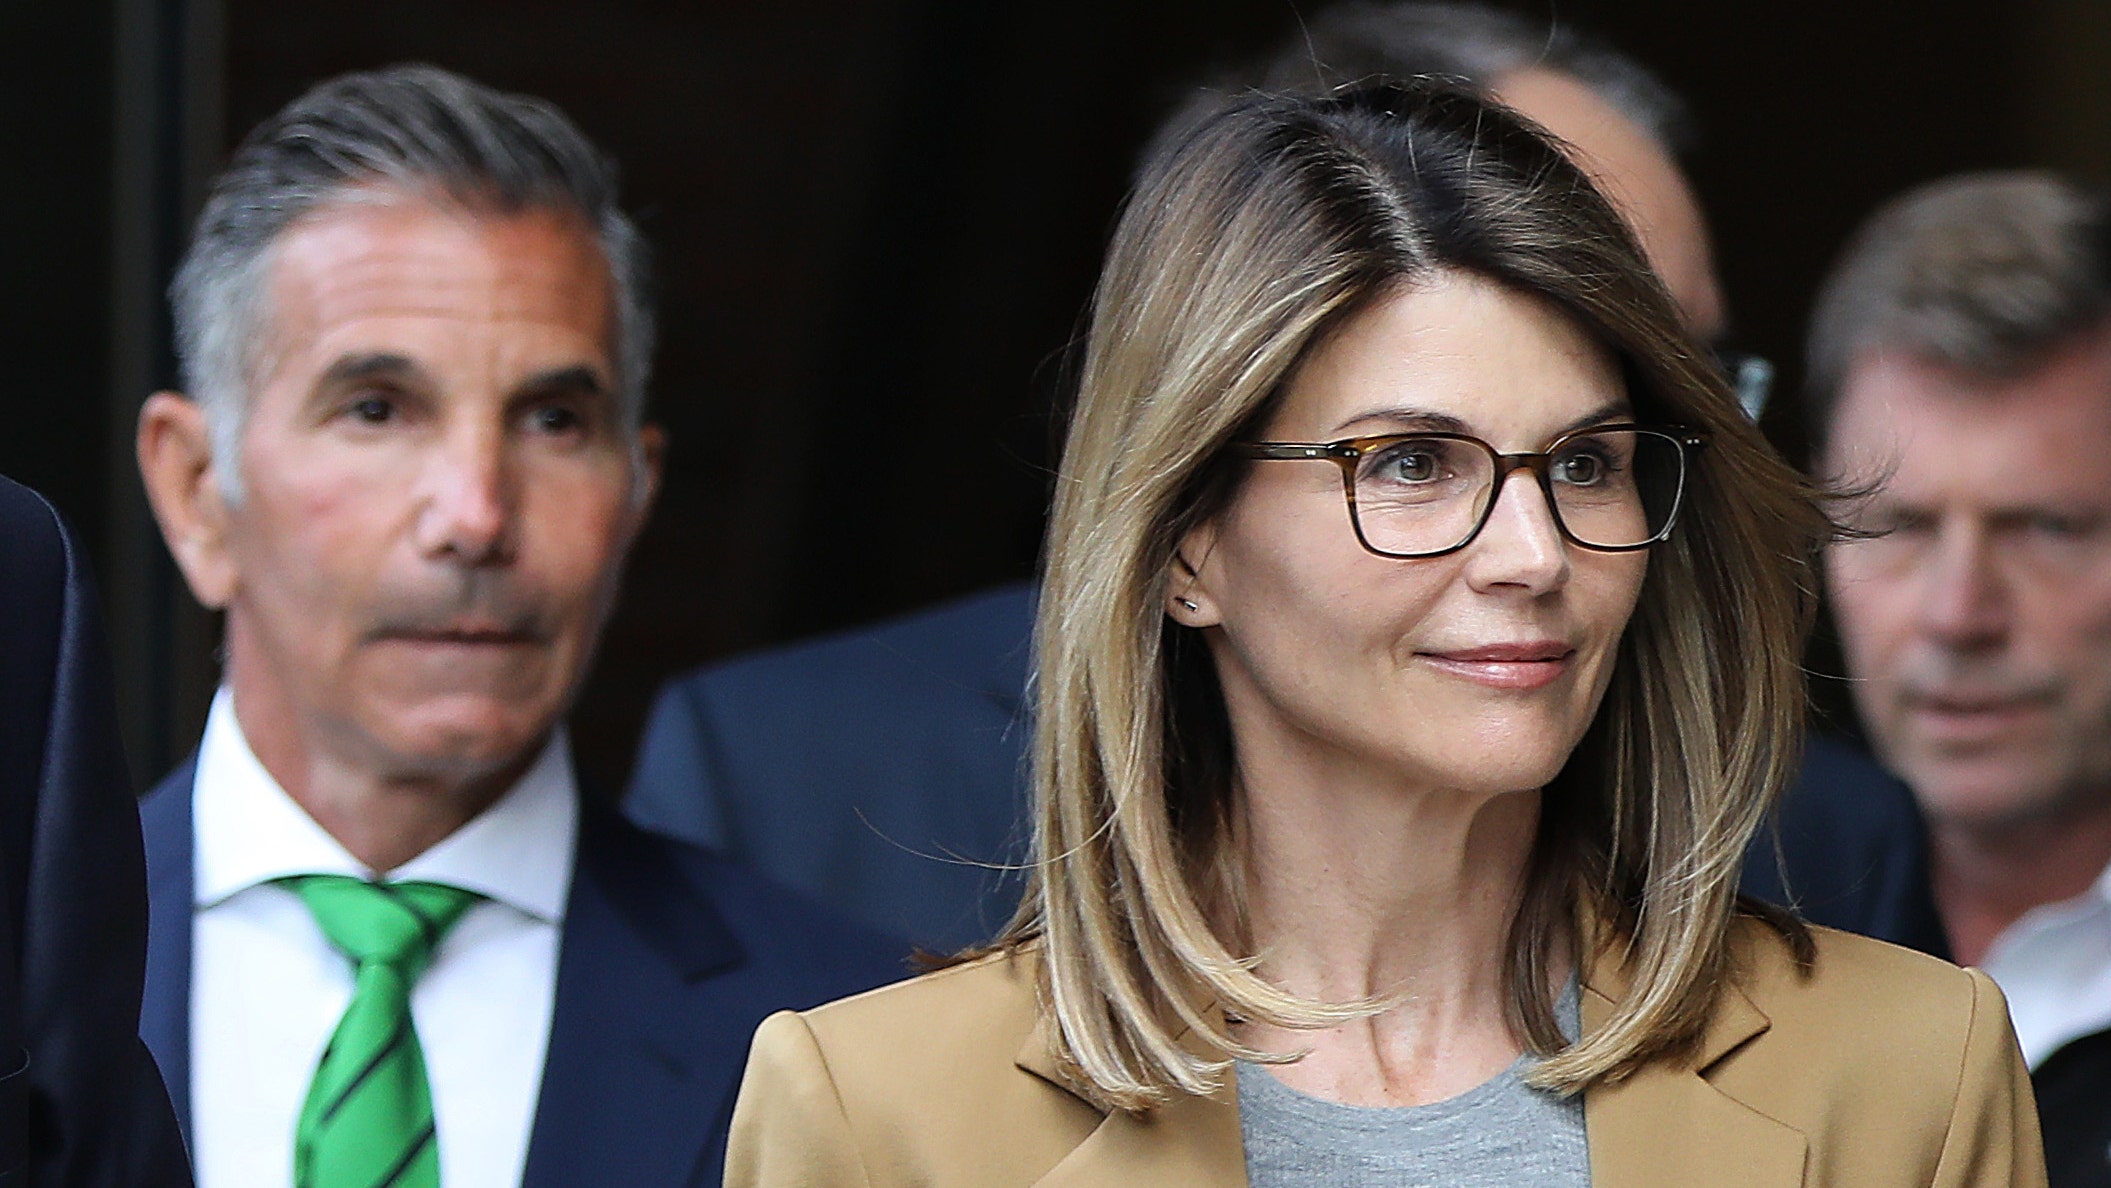 Lori Loughlin ‘stressed’ about husband Mossimo Giannulli sitting in jail: report